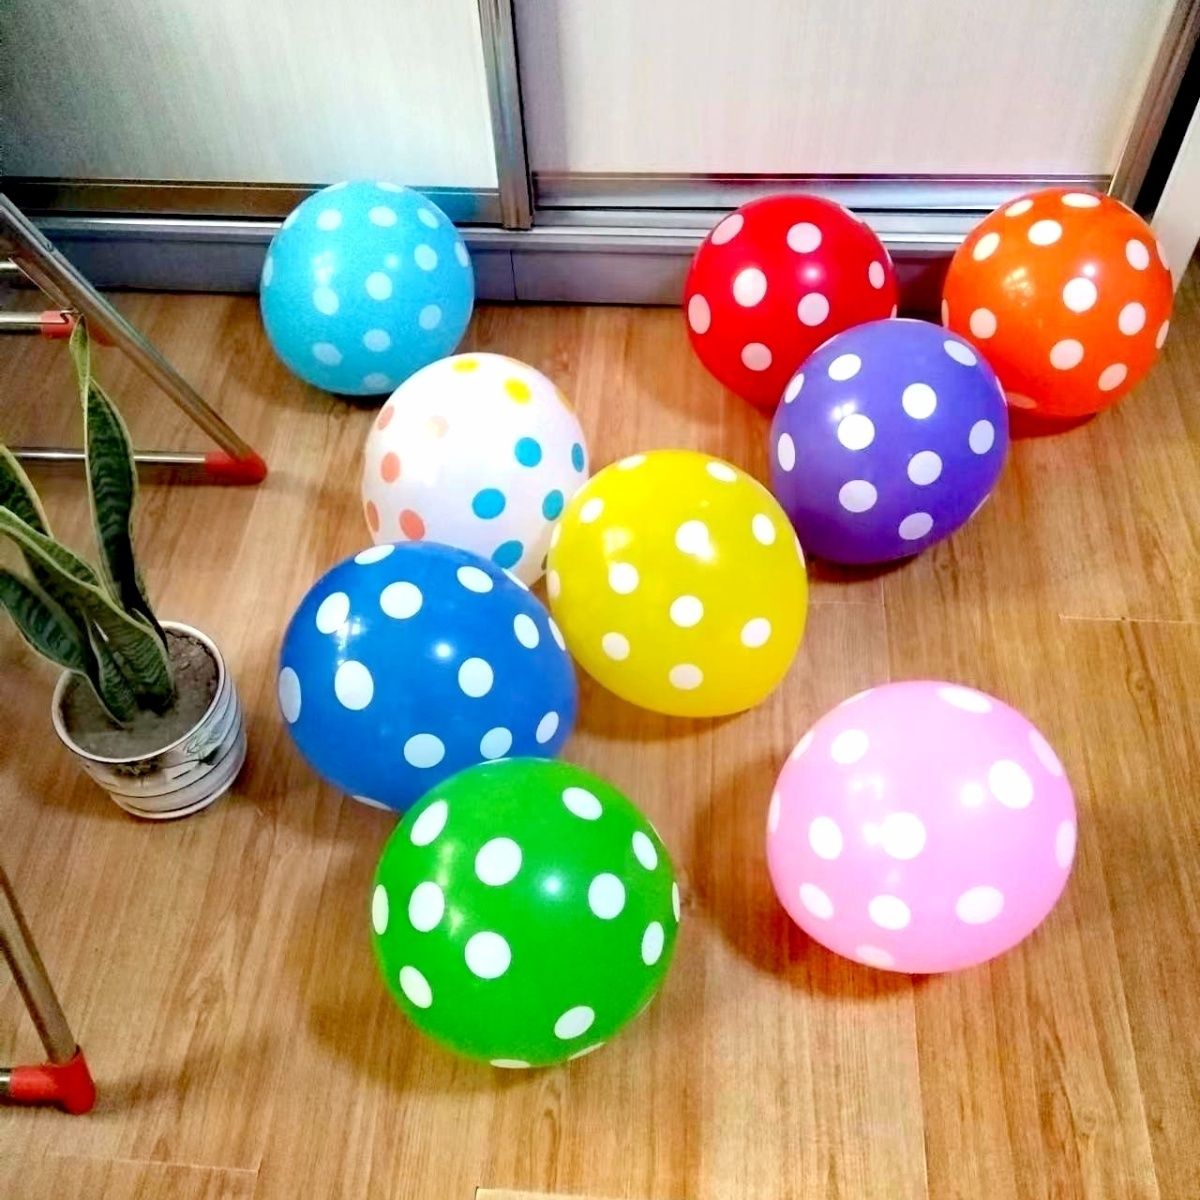 No. plus-Sized 12-Inch Thickened 2.8G Mixed Color Polka Dot Balloon Birthday Party Decoration Candy Color Polka Dot Balloon